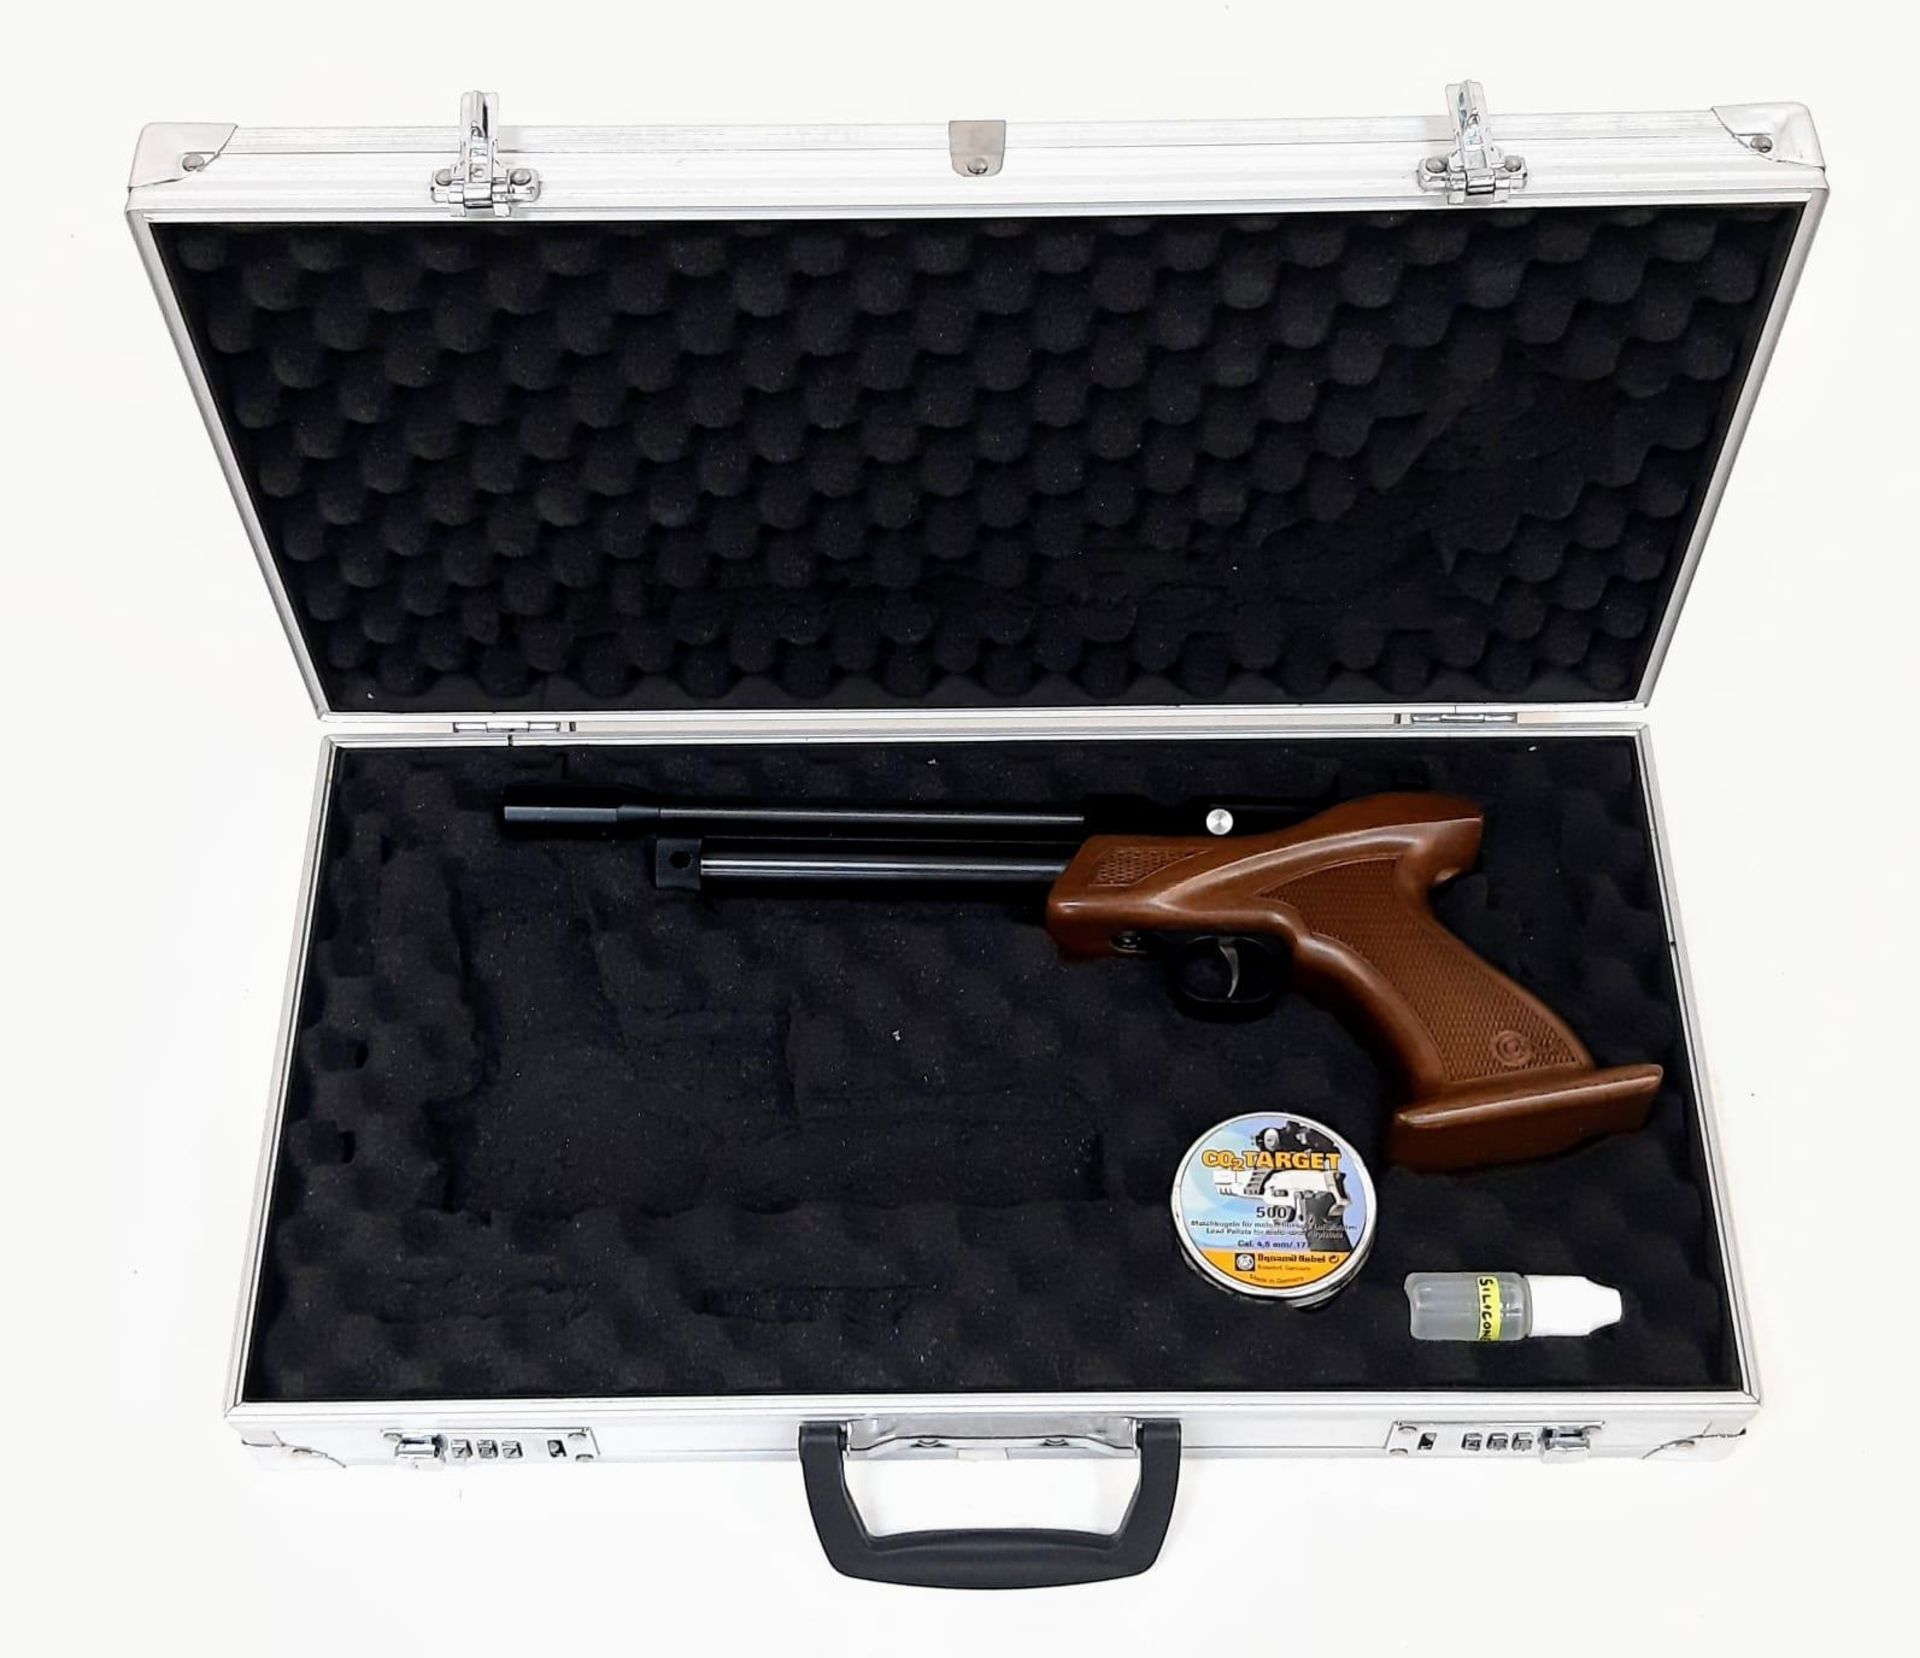 An Immaculate Condition .177 Calibre CP1-M CO2 Competition Target Air Pistol by SMK. Highly